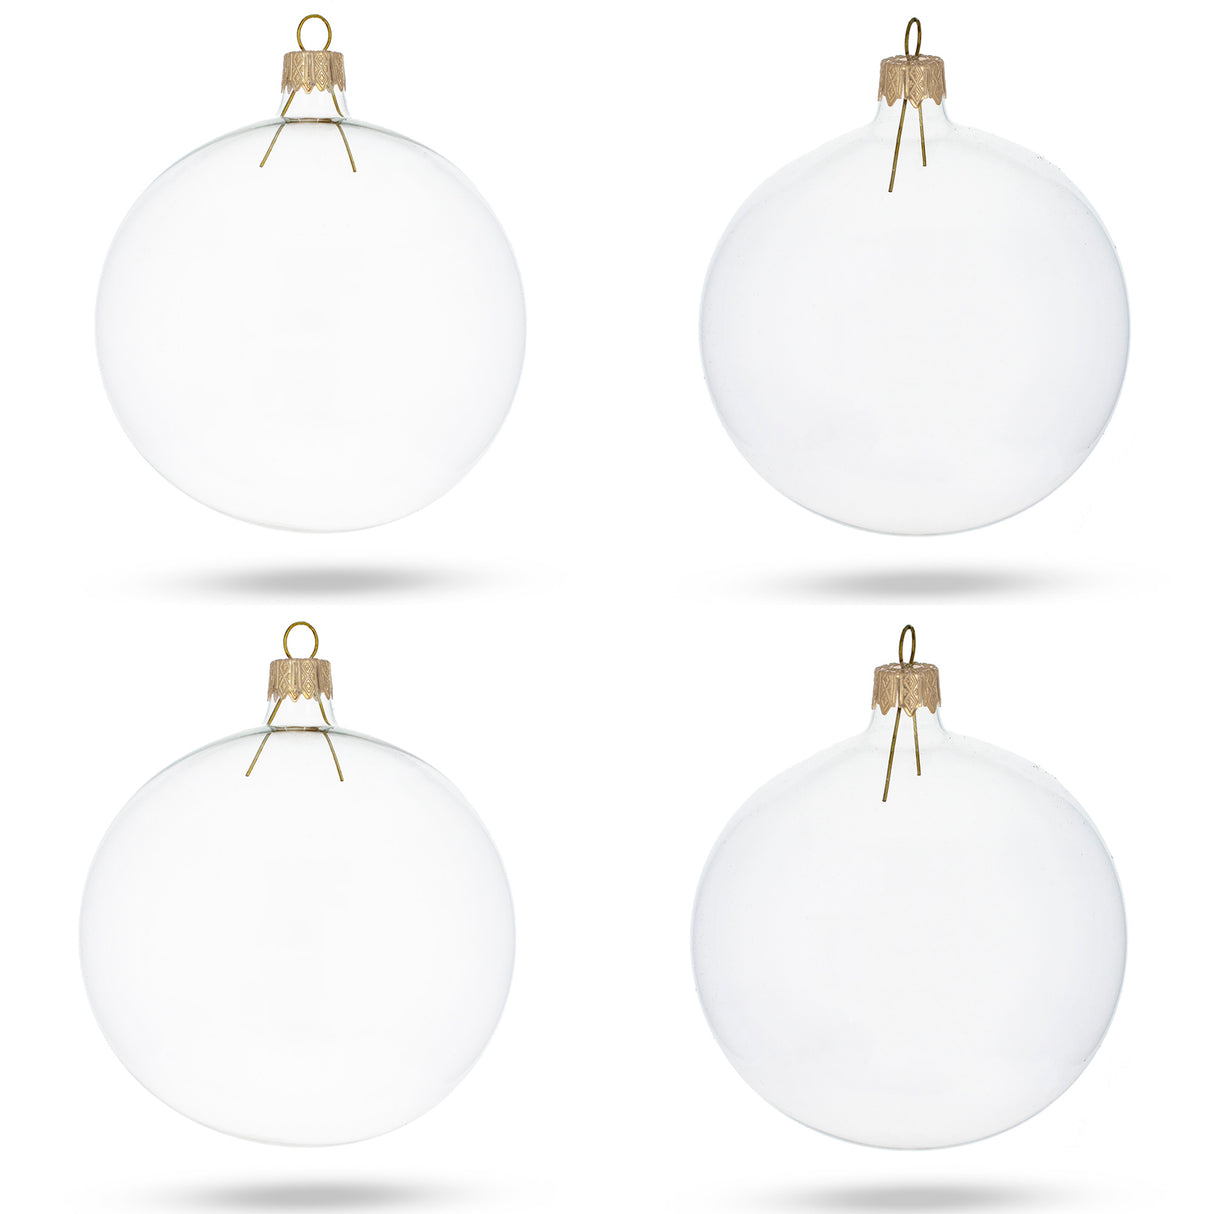 Glass Set of 4 Clear Glass Ball Christmas Ornaments DIY Craft 4 Inches in Clear color Round